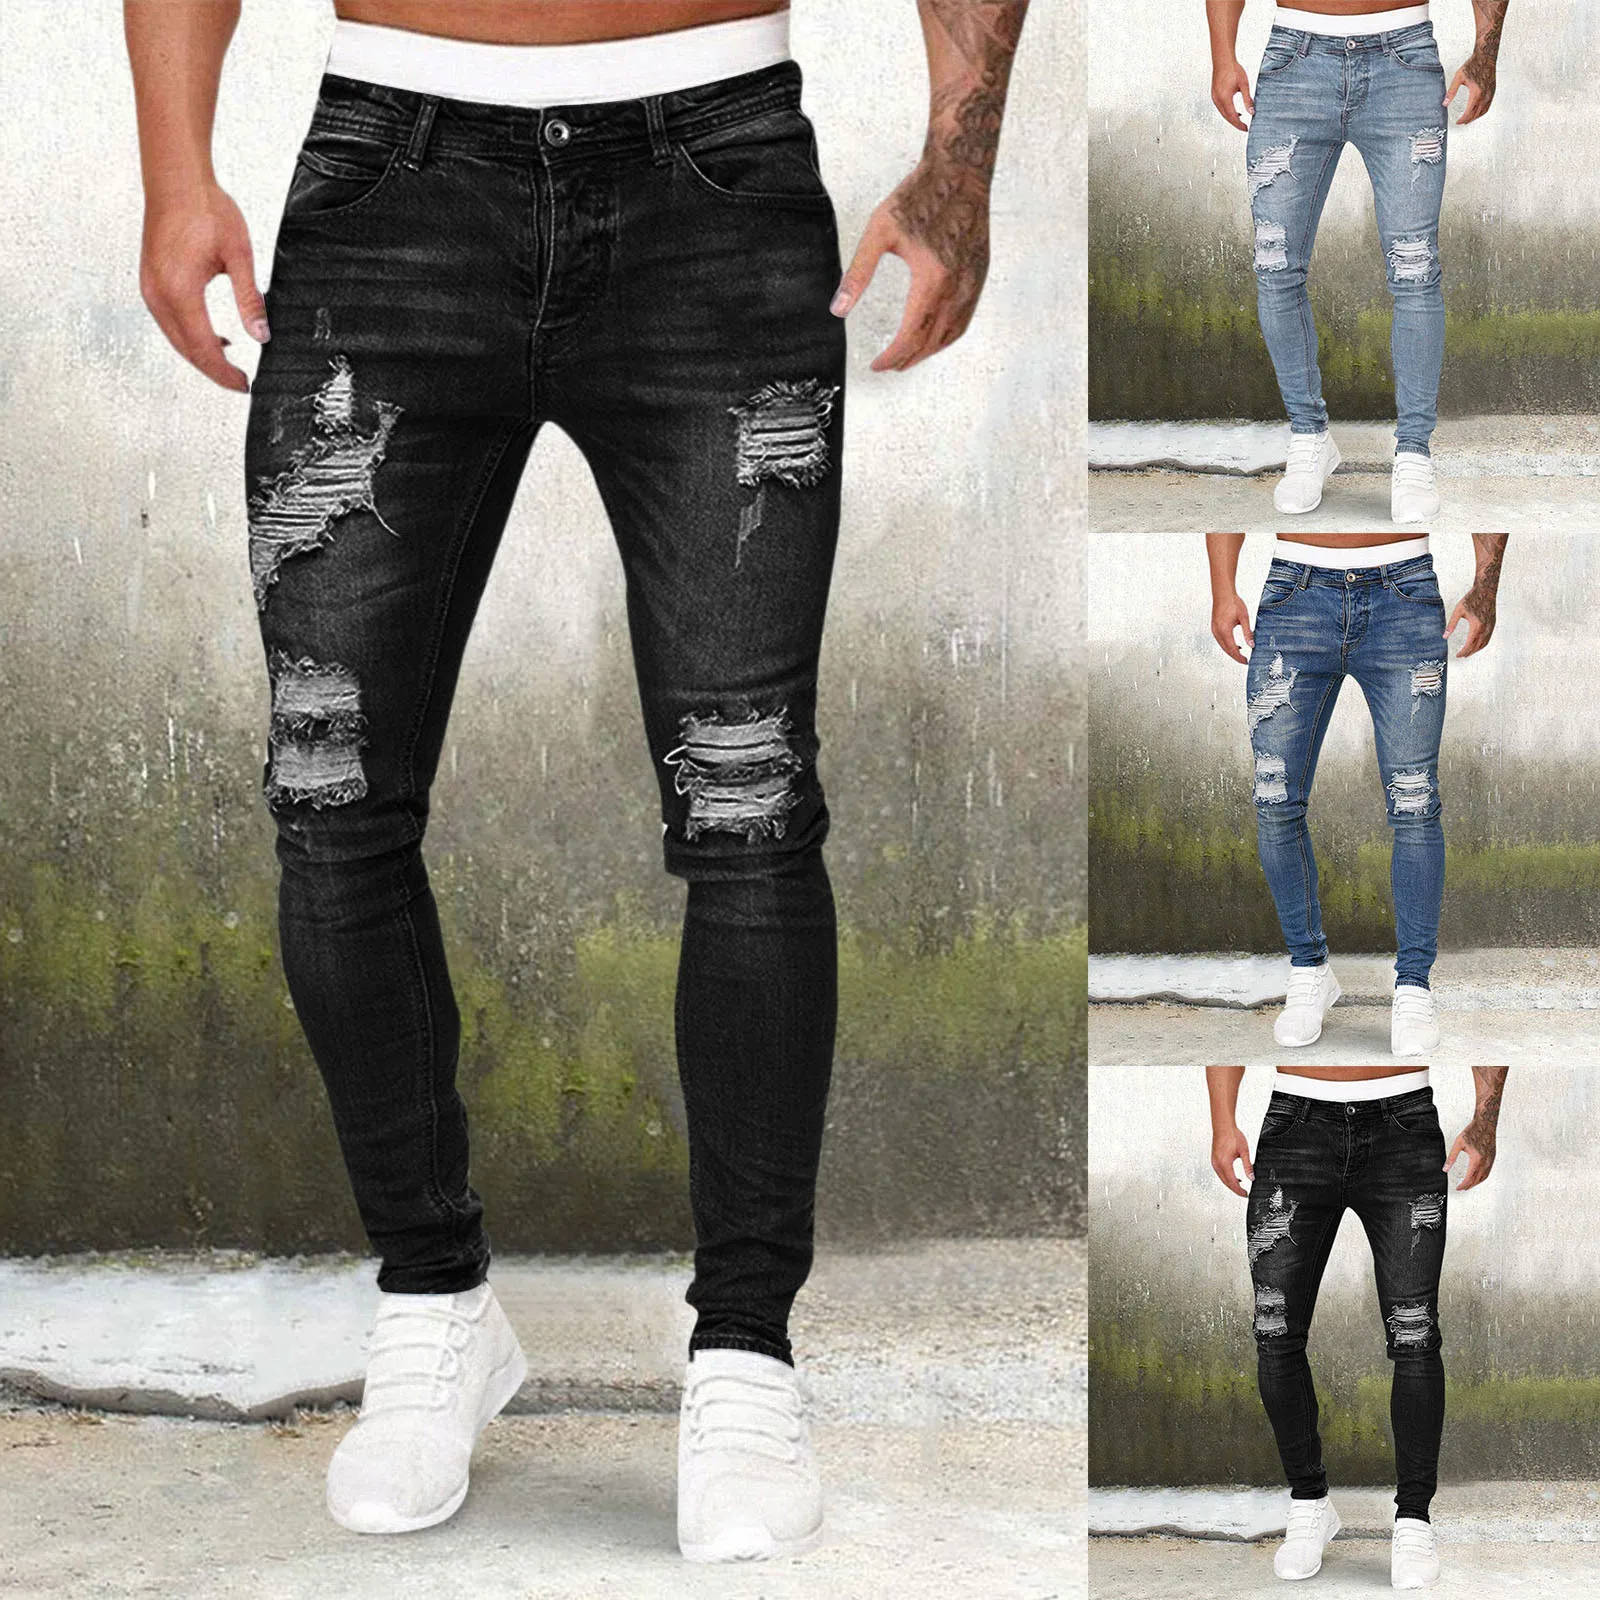 Europe America Mens Ripped Skinny Jeans Blue Slim Hole Pencil Pants Biker Casual Trousers Streetwear High Quality Denim Clothing blue ripped cut out jeans women sexy hole hollow out stretch skinny streetwear denim trousers lady denim pencil pants for female